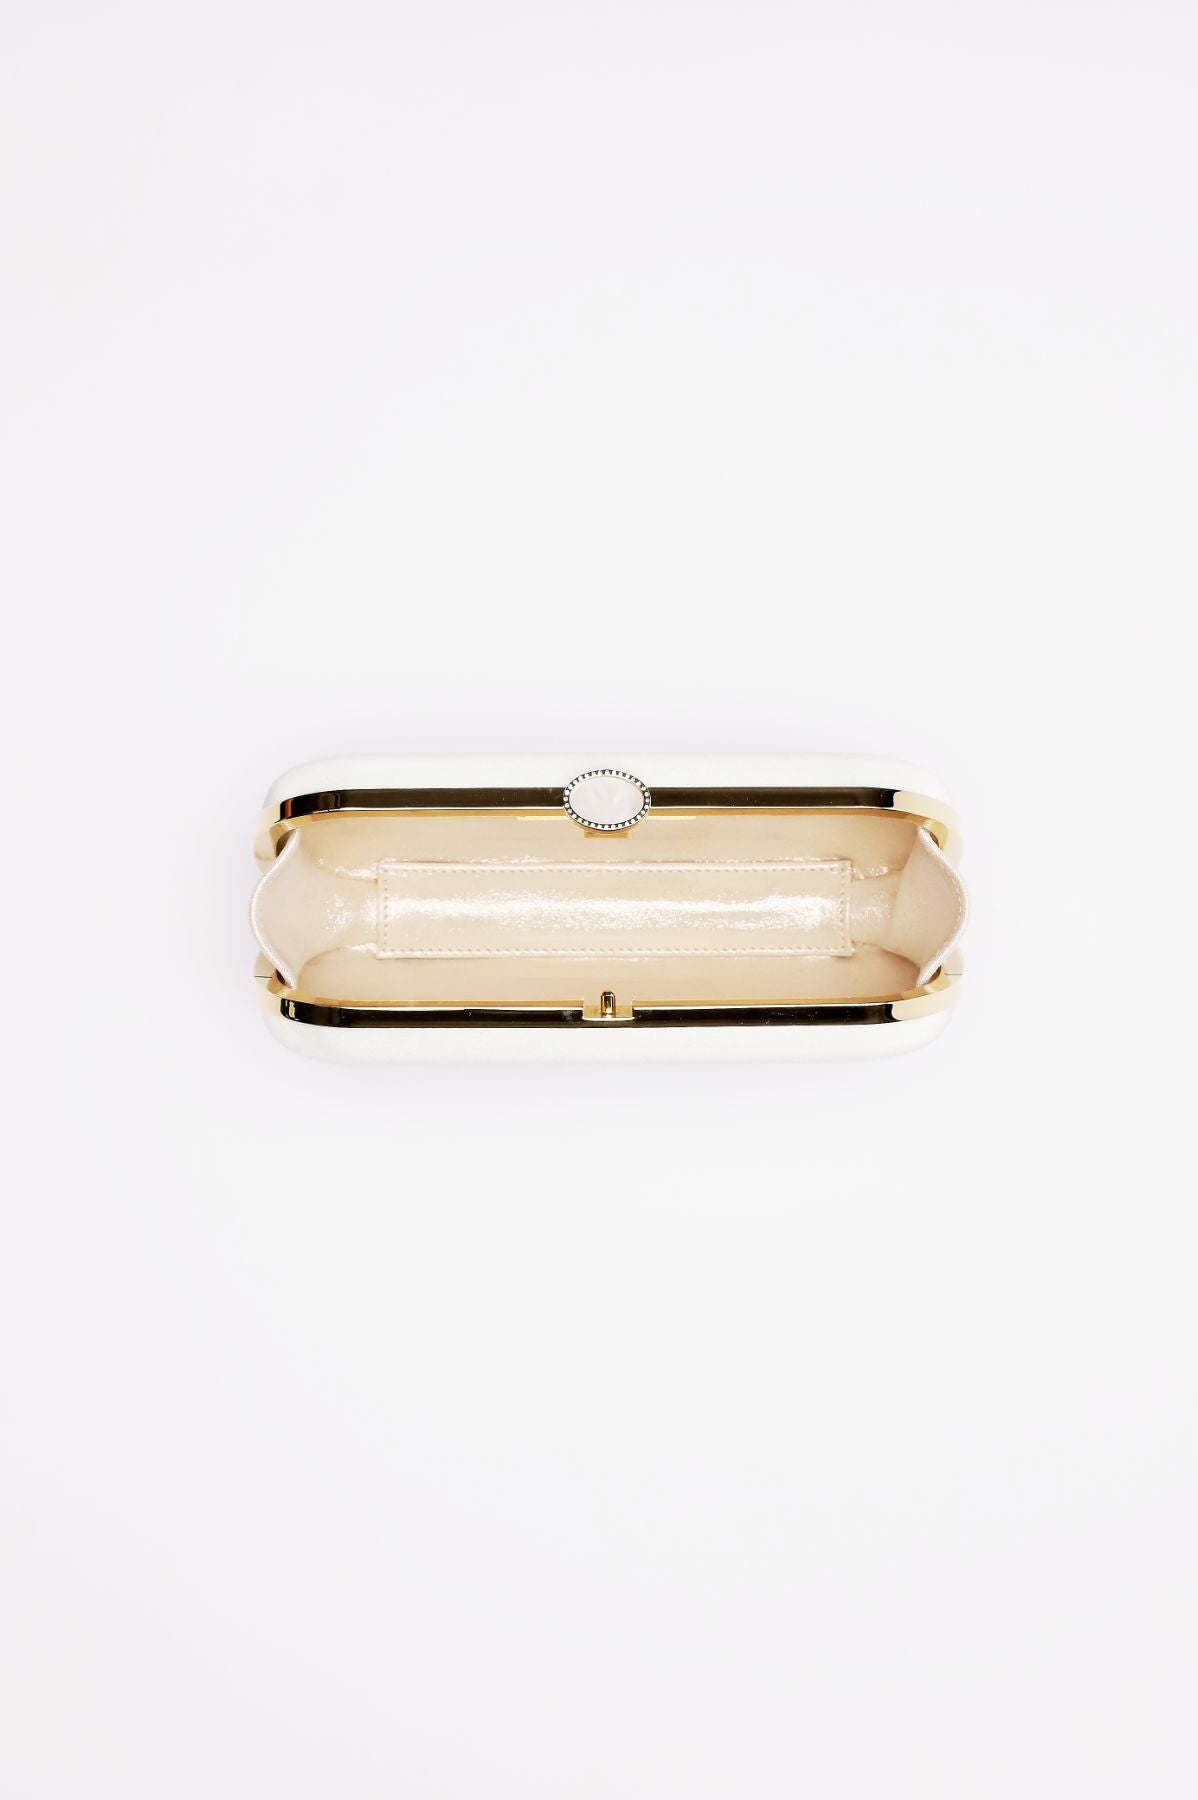 An open, empty Bella Clutch Ivory Petite made of Duchess Satin on a white background by The Bella Rosa Collection.